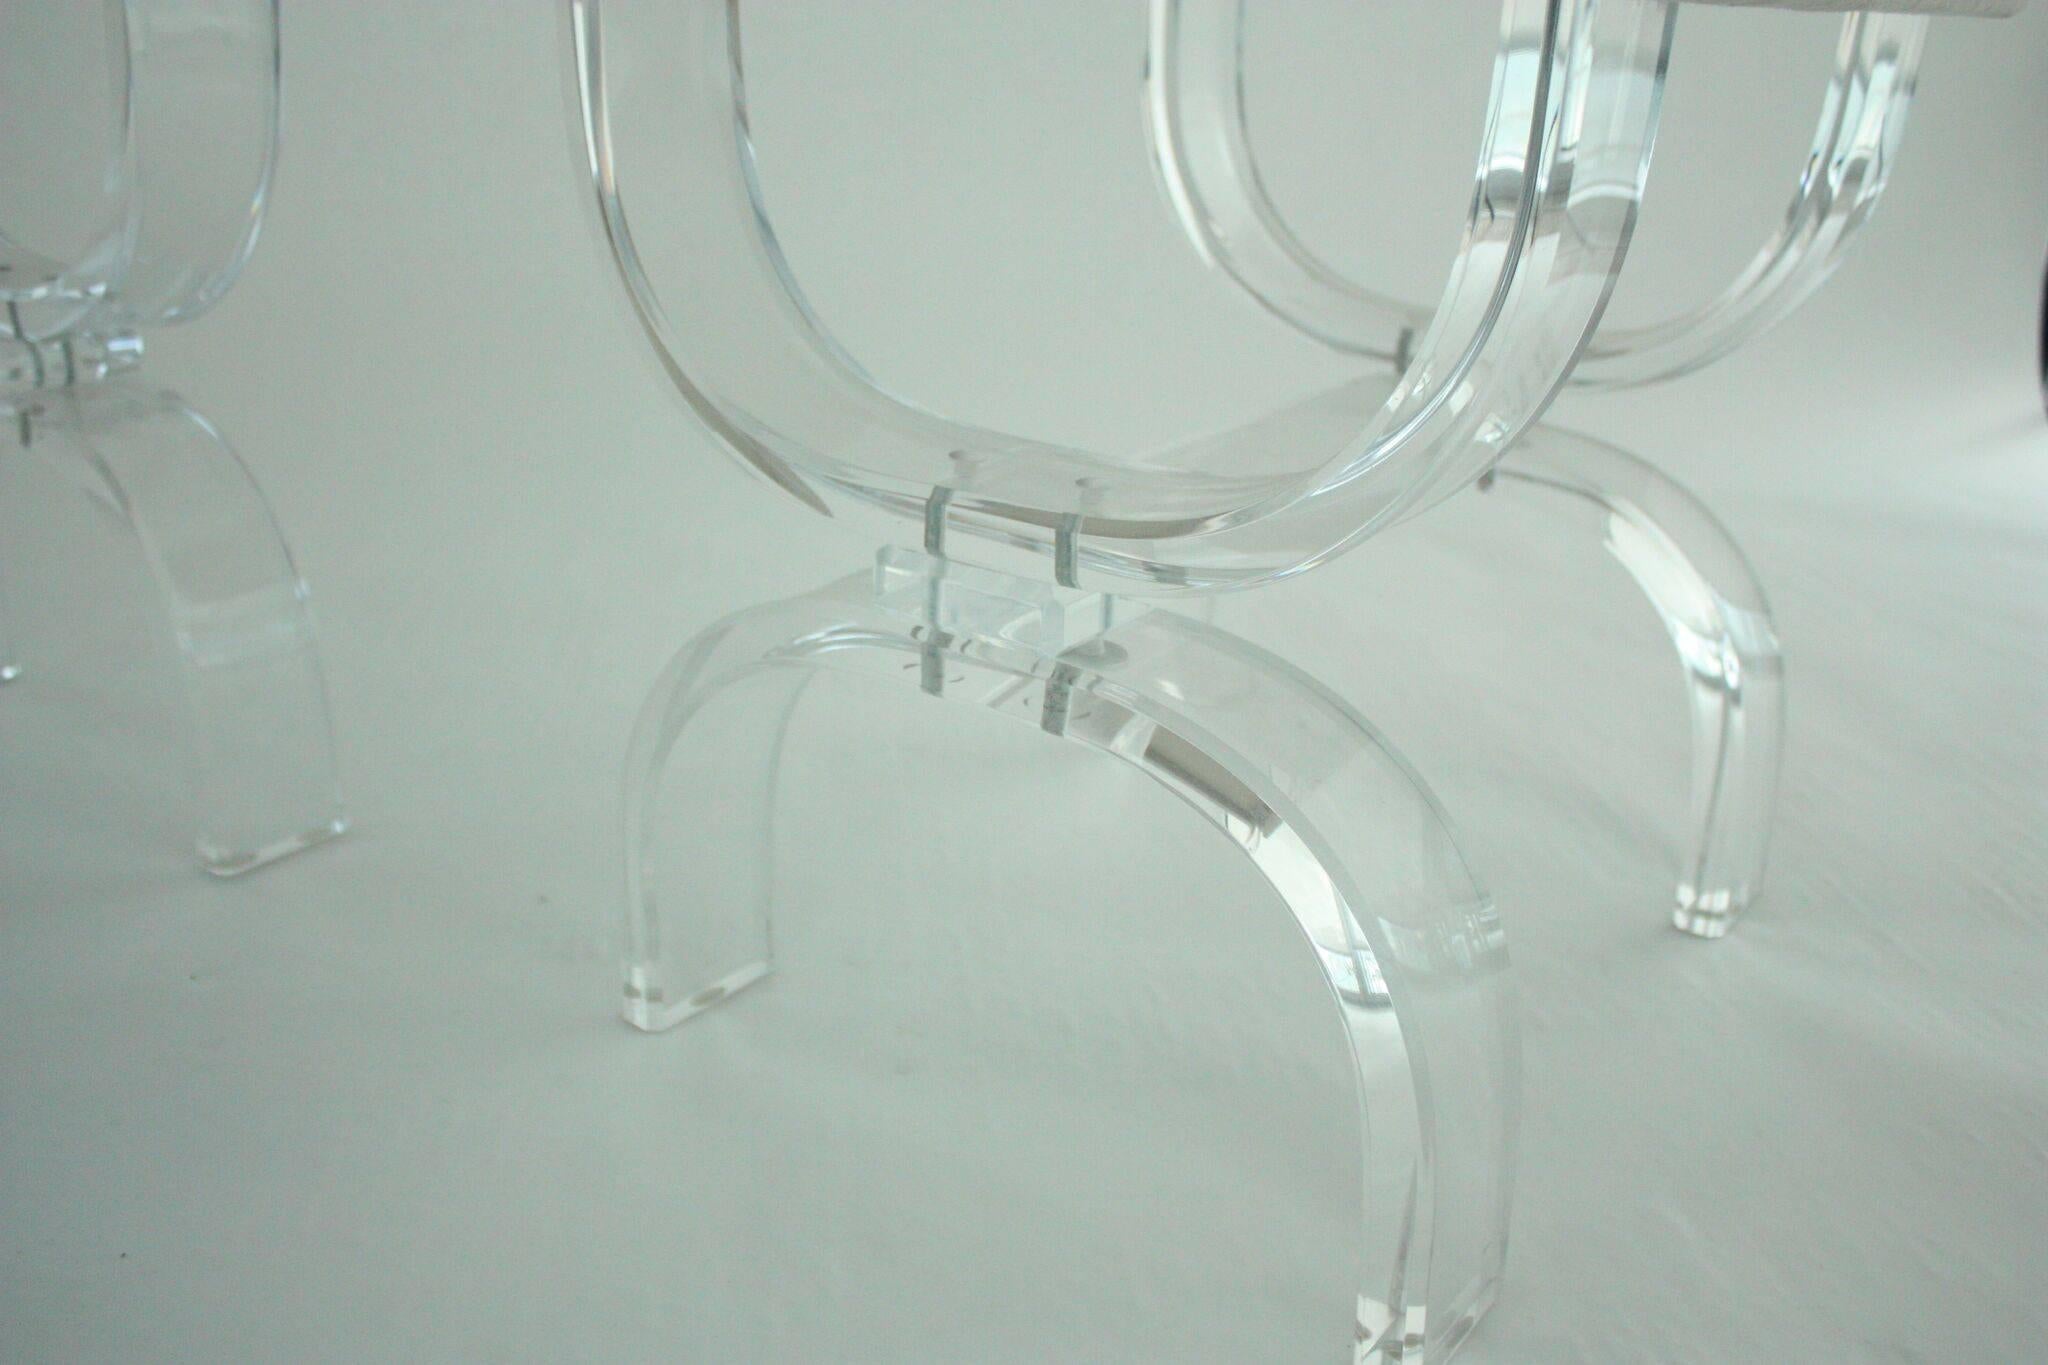 Pair of Midcentury Lucite stools, USA, 1970s. Recently reupholstered in a glazed linen. Very good overall condition.

